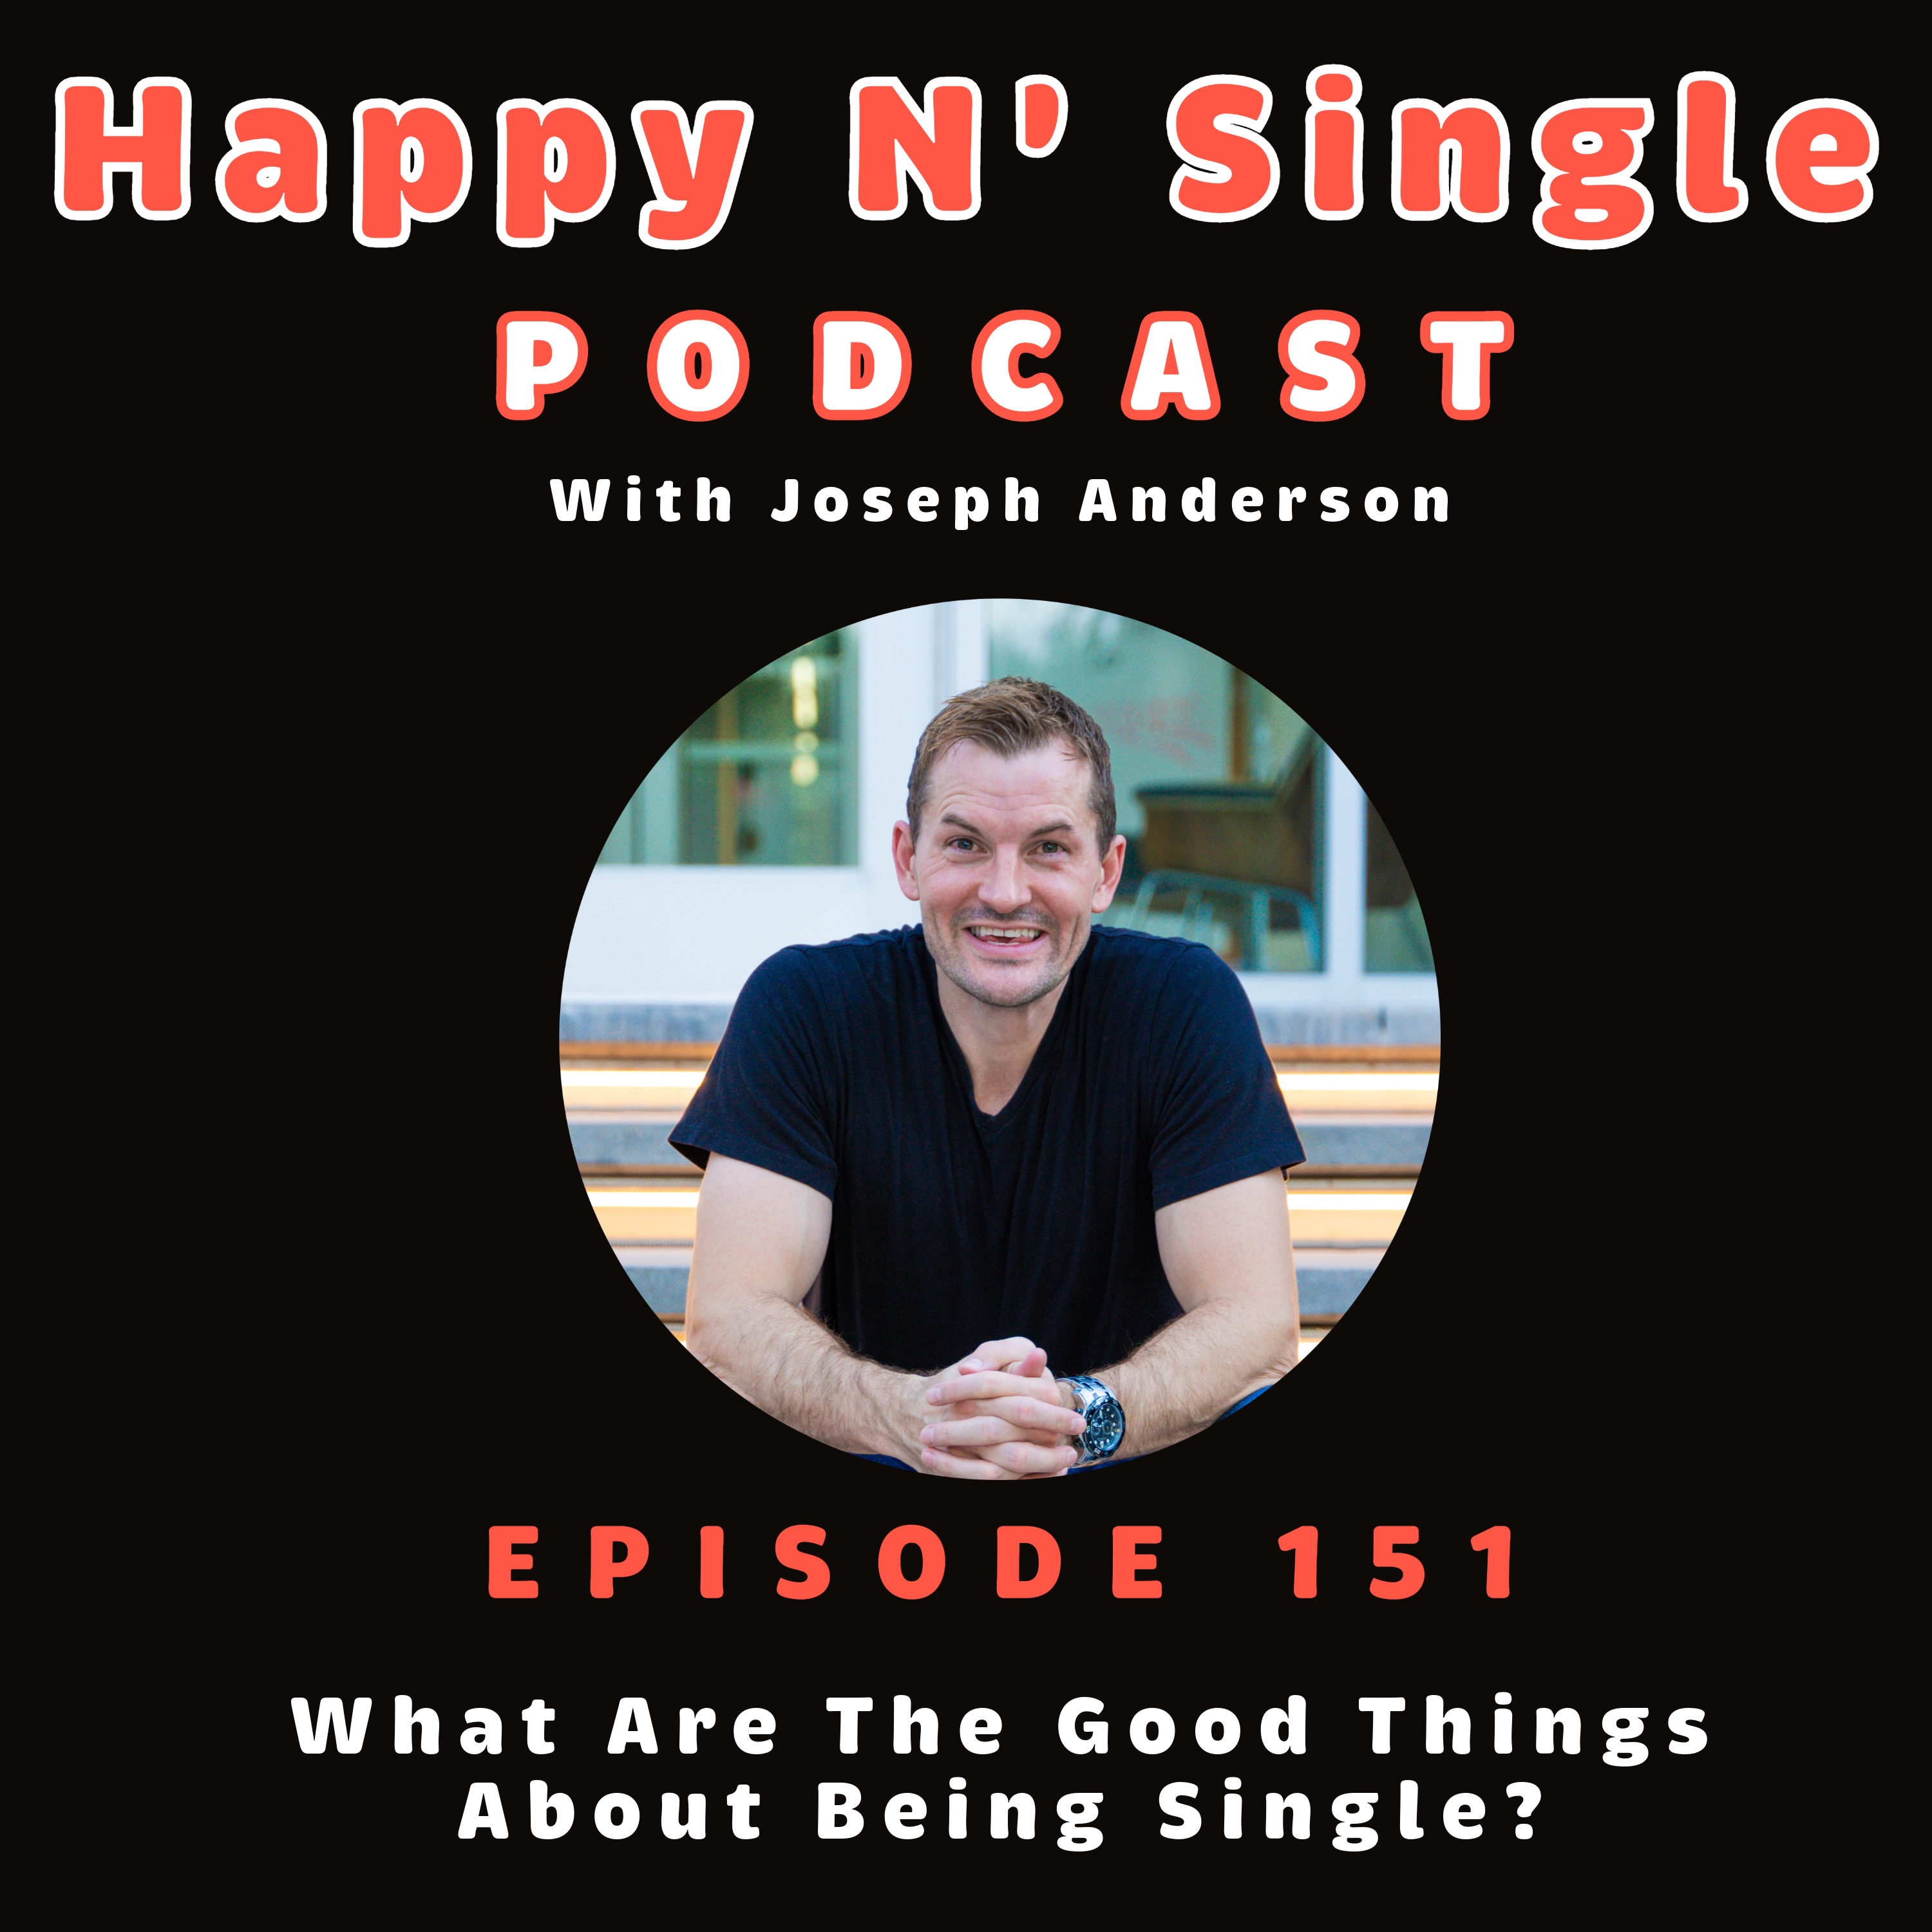 What Are The Good Things About Being Single?